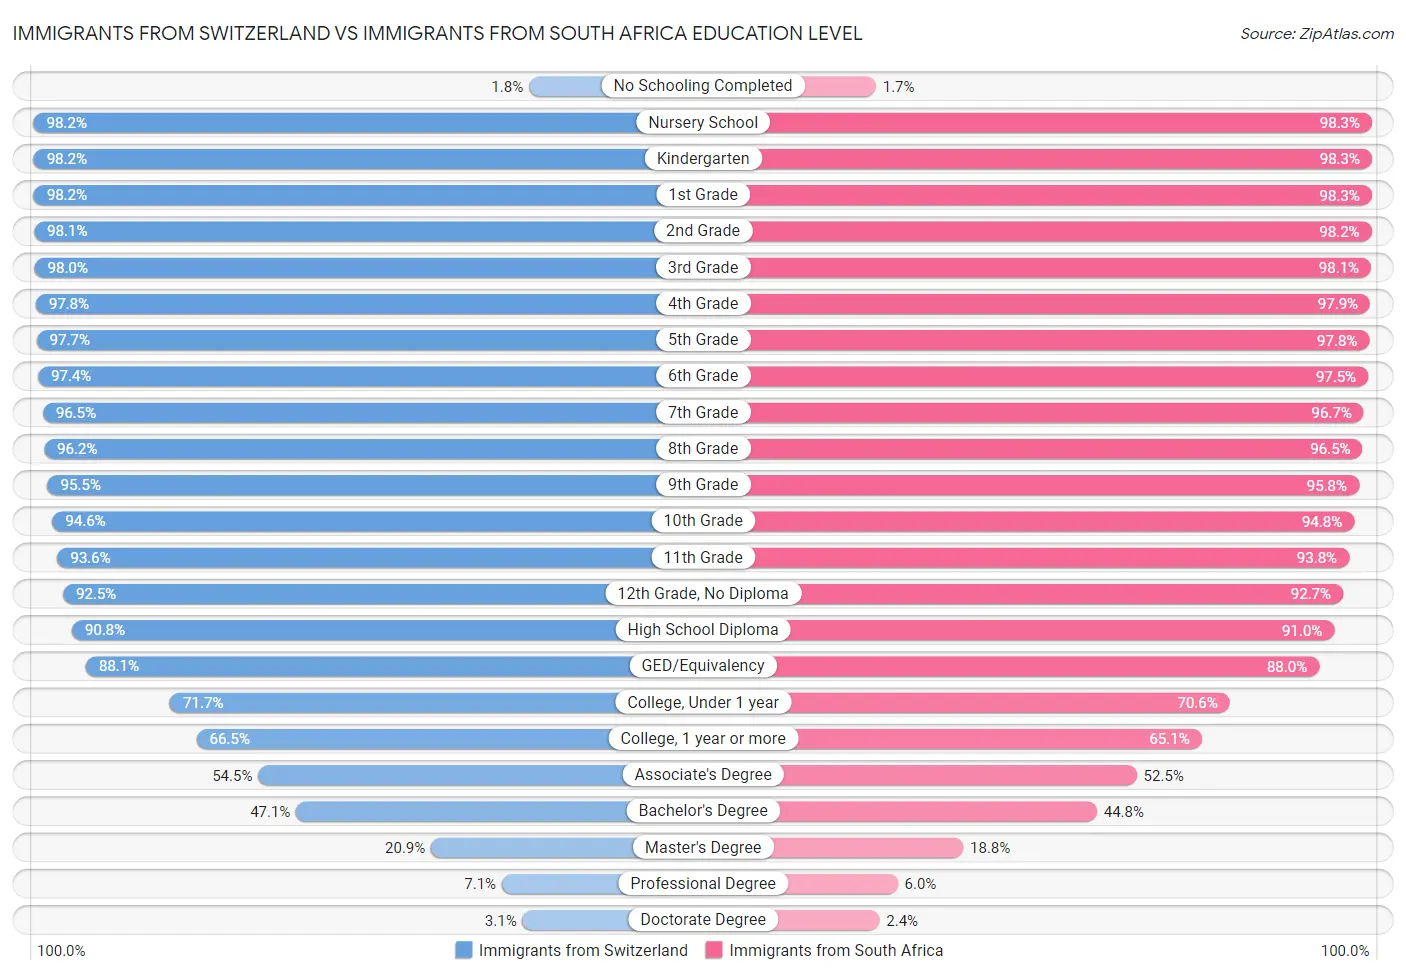 Immigrants from Switzerland vs Immigrants from South Africa Education Level